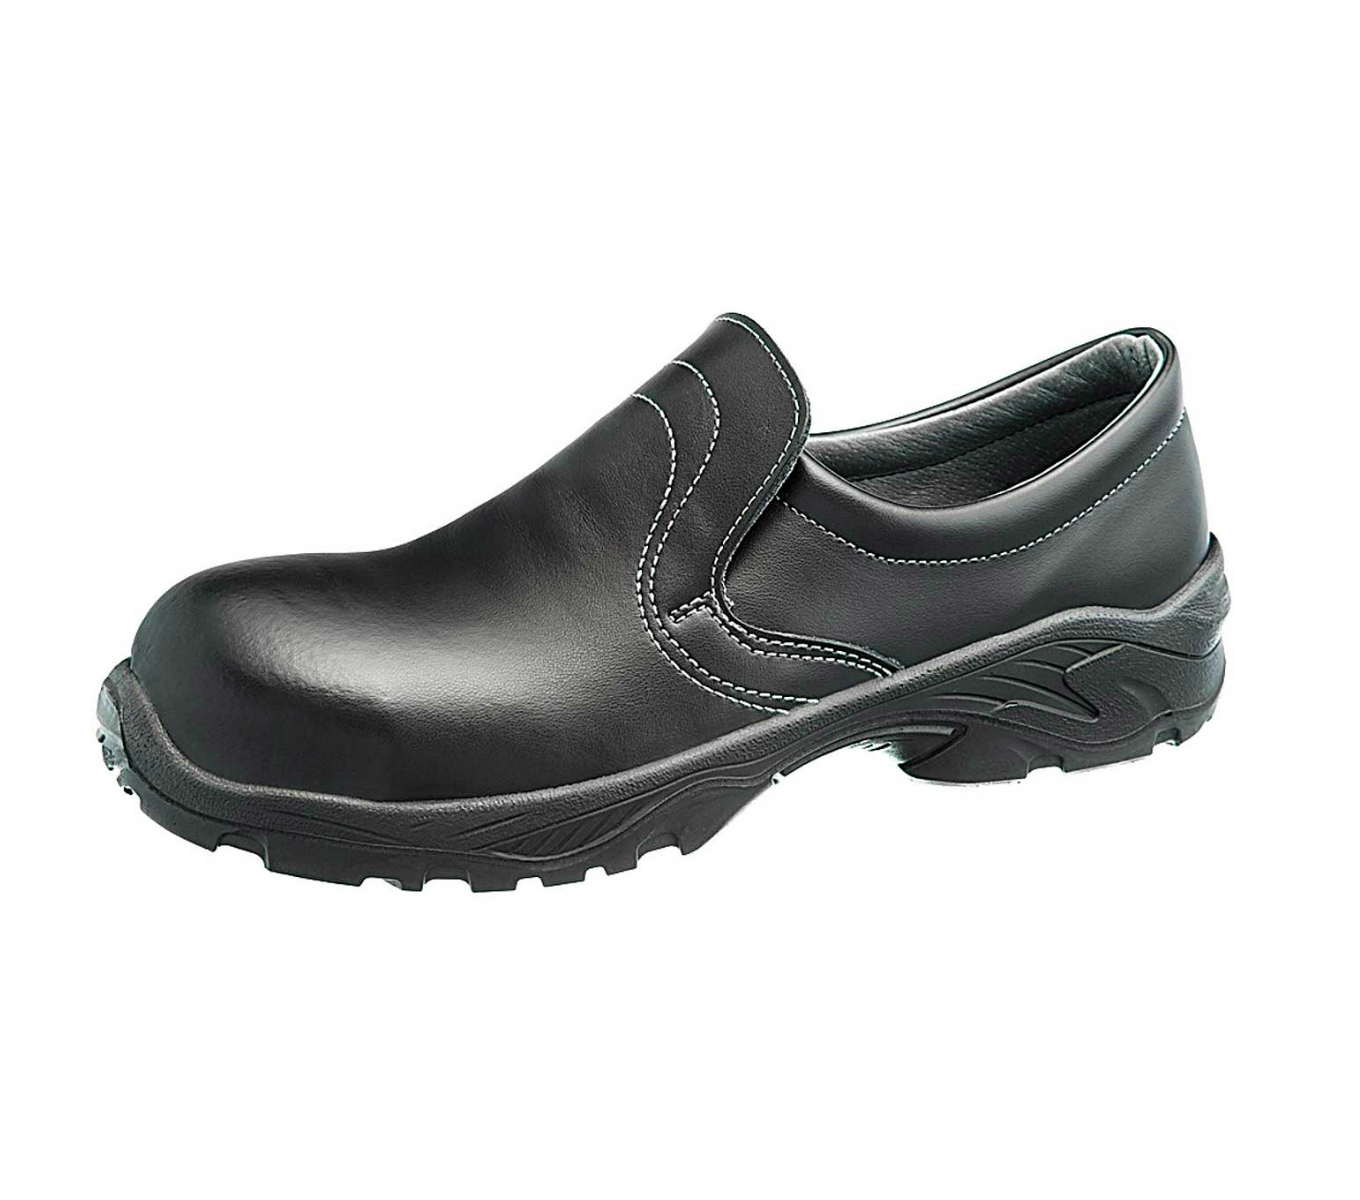 ESD Safety Shoes - Sievi Alfa S2 